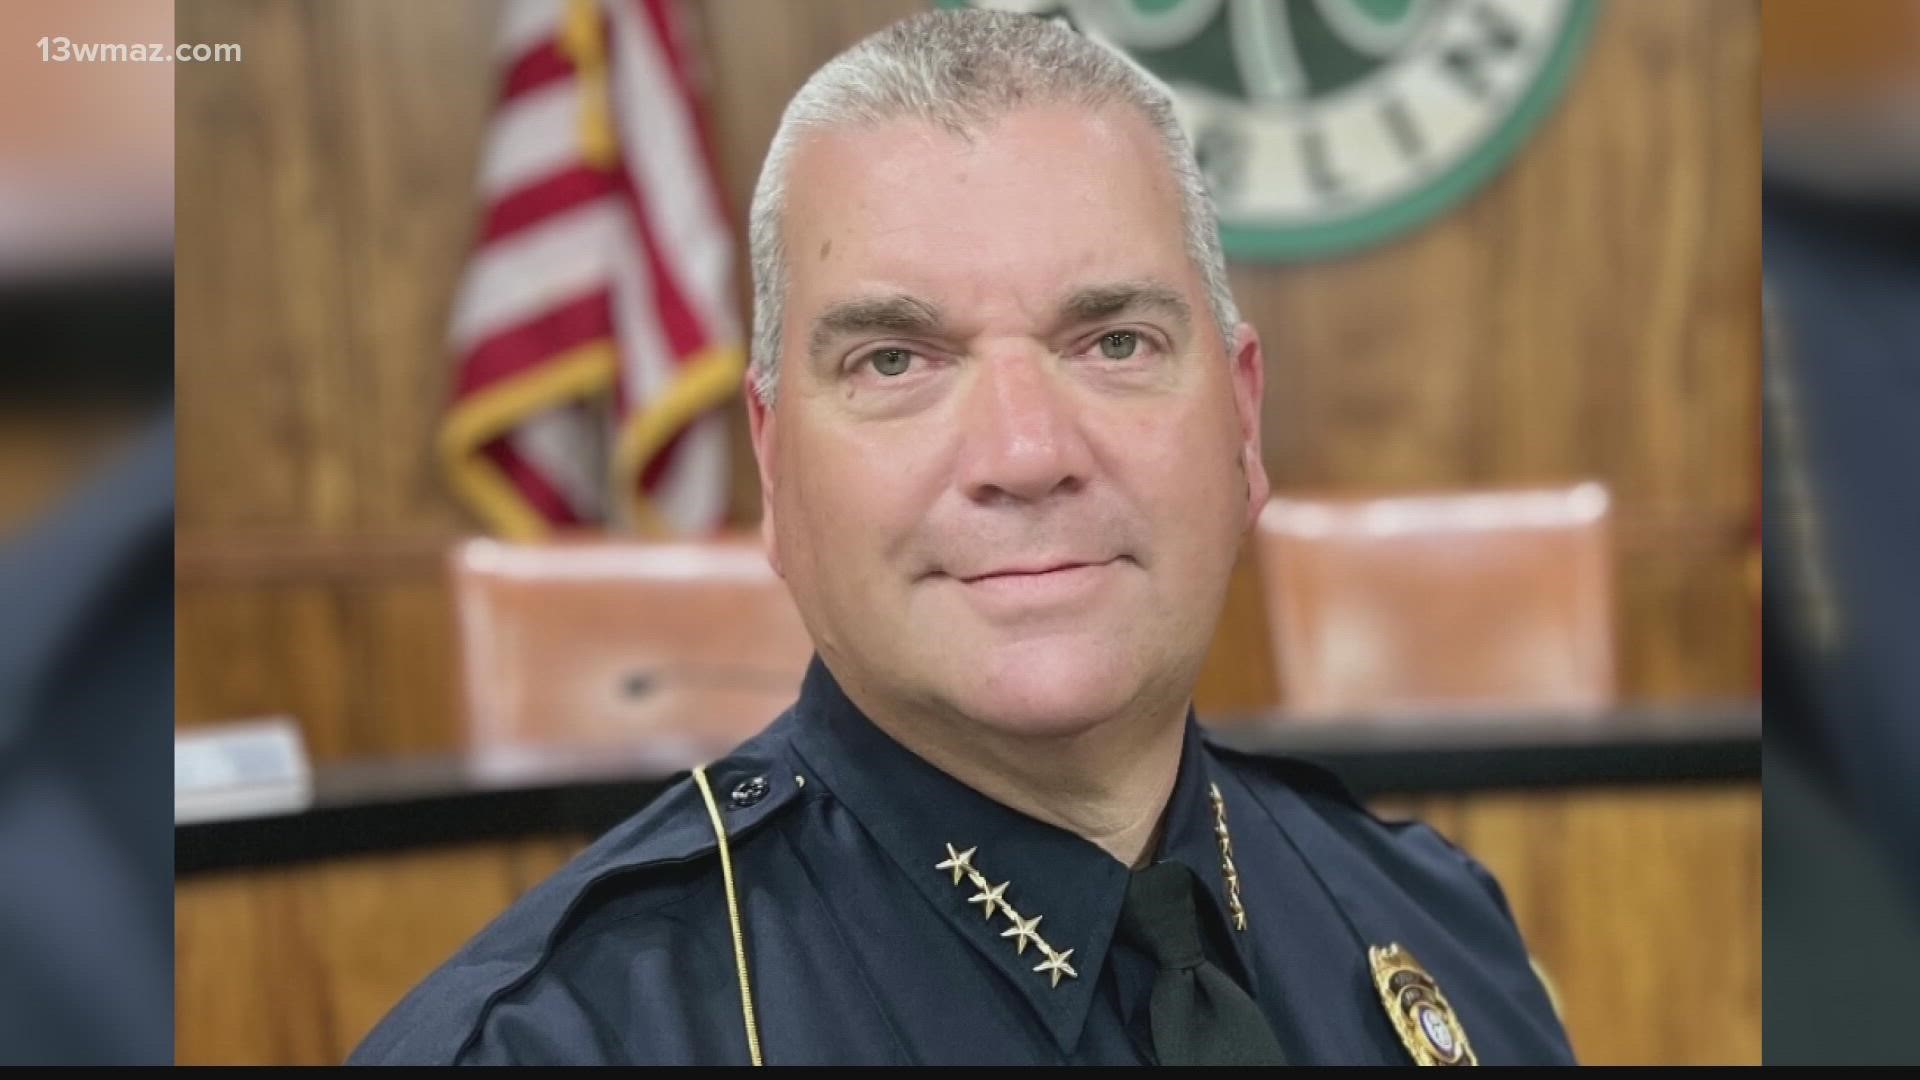 They announced on Monday that Keith Moon would serve as the new police chief, but he was actually appointed last Thursday